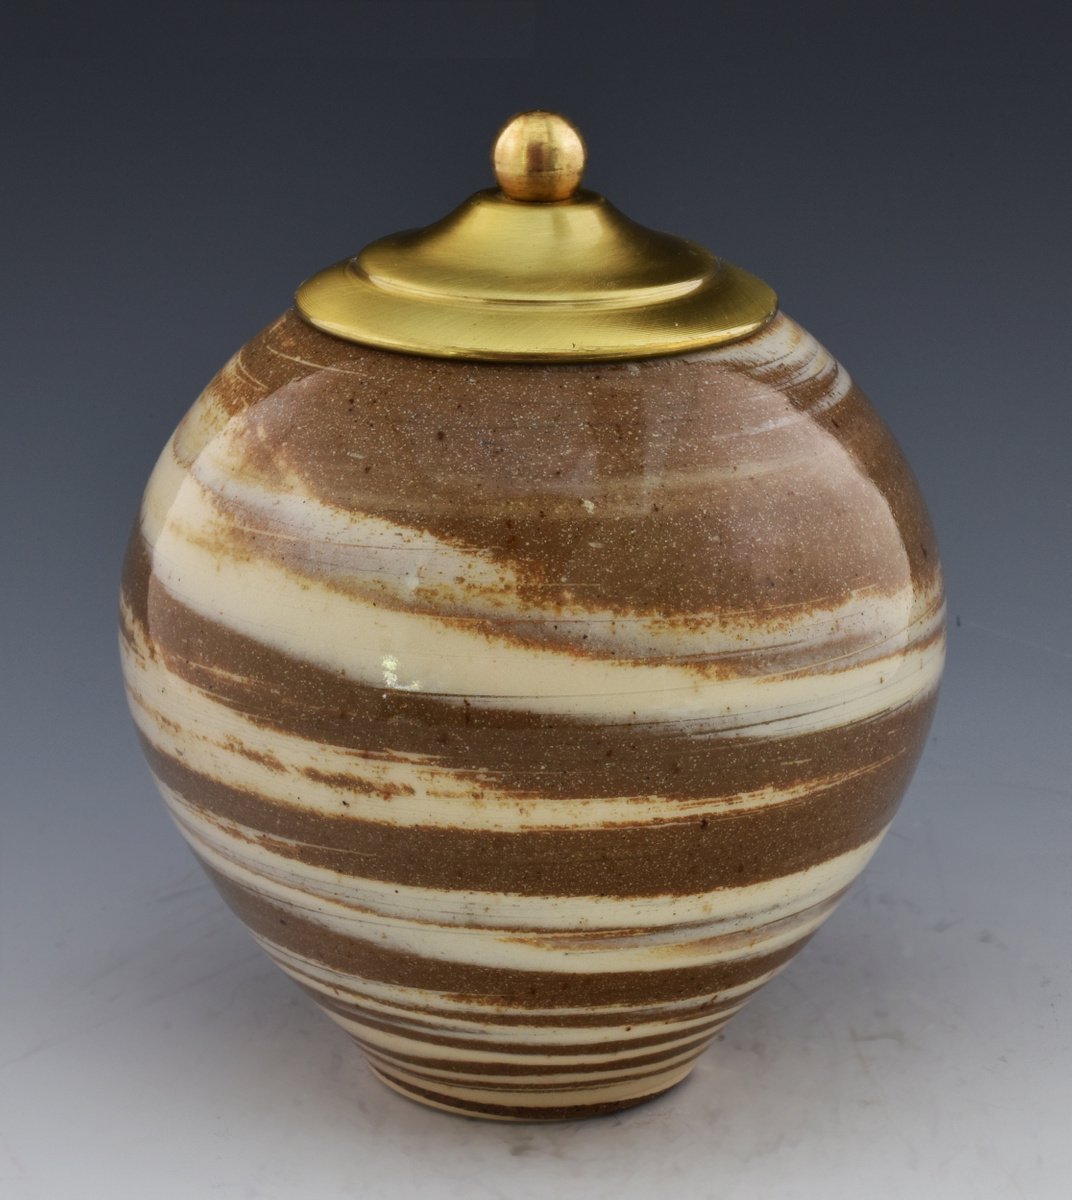 Neriage ceramic vessel colored porcelain with brass and cork seal. N13 by Ron Mello